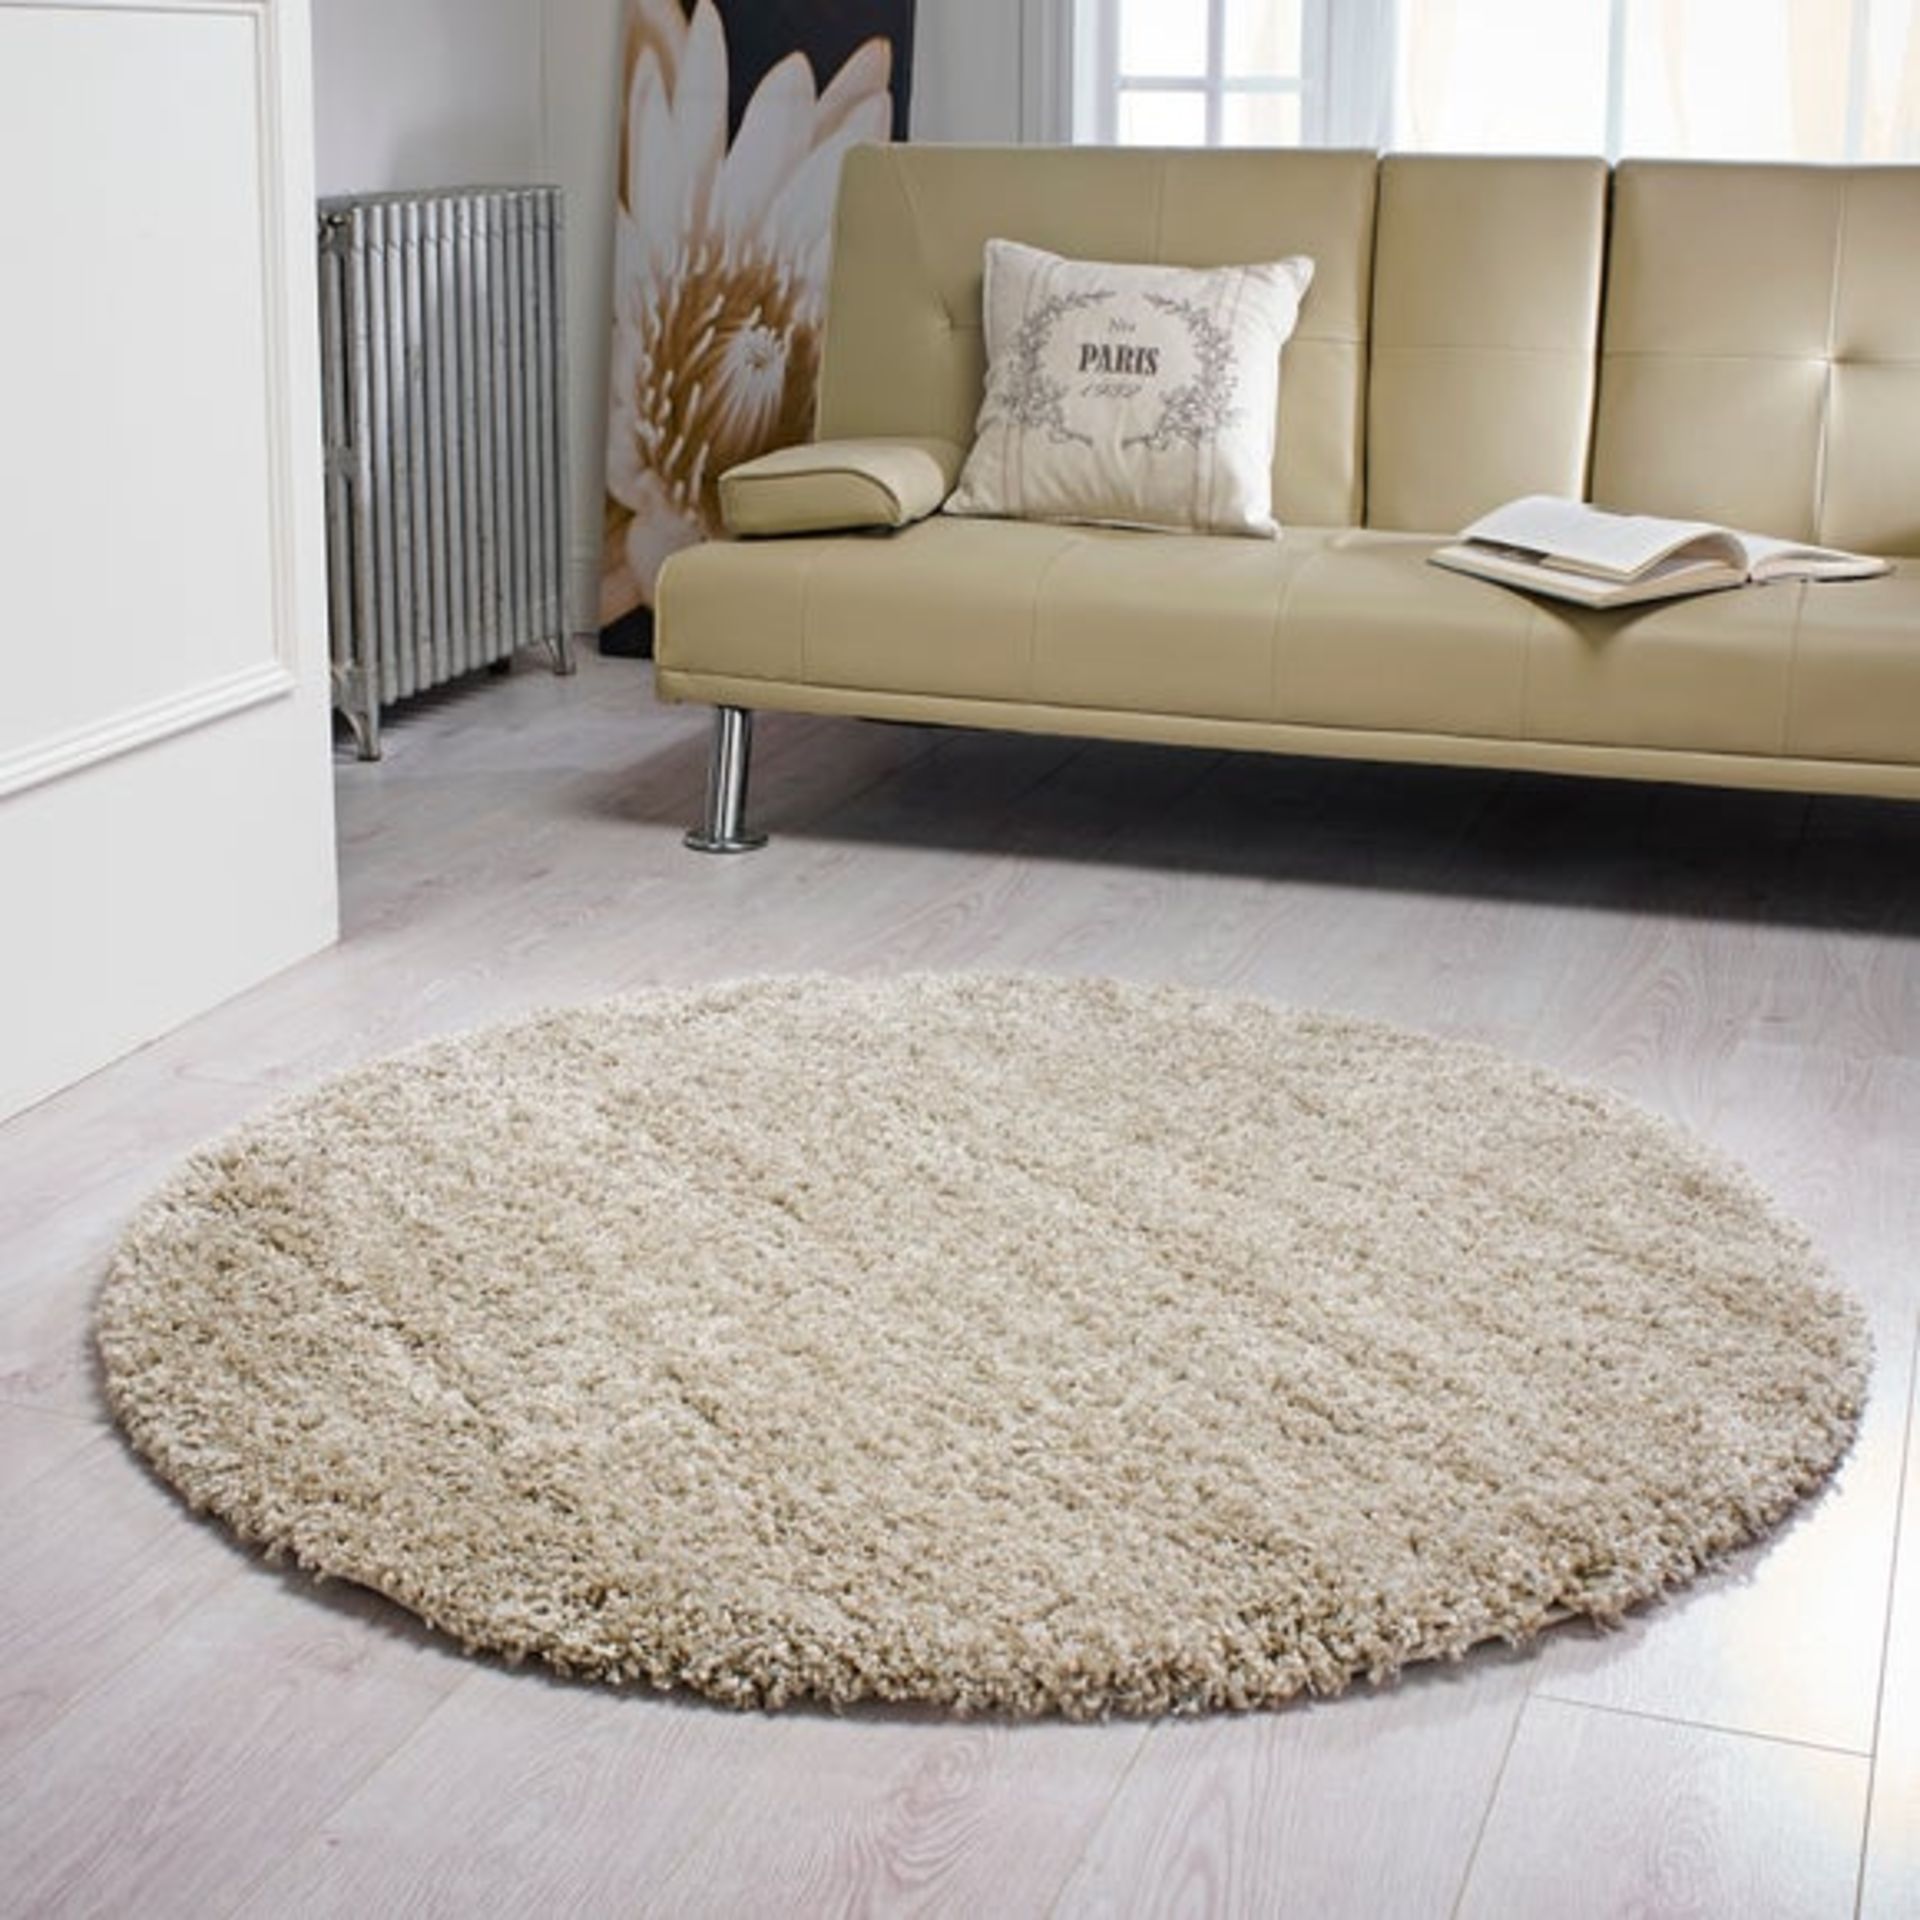 Luxus D040 Slumber Natural Circle 180X180 RRP 115 About the Product(s) Luxus D040 Slumber Natural